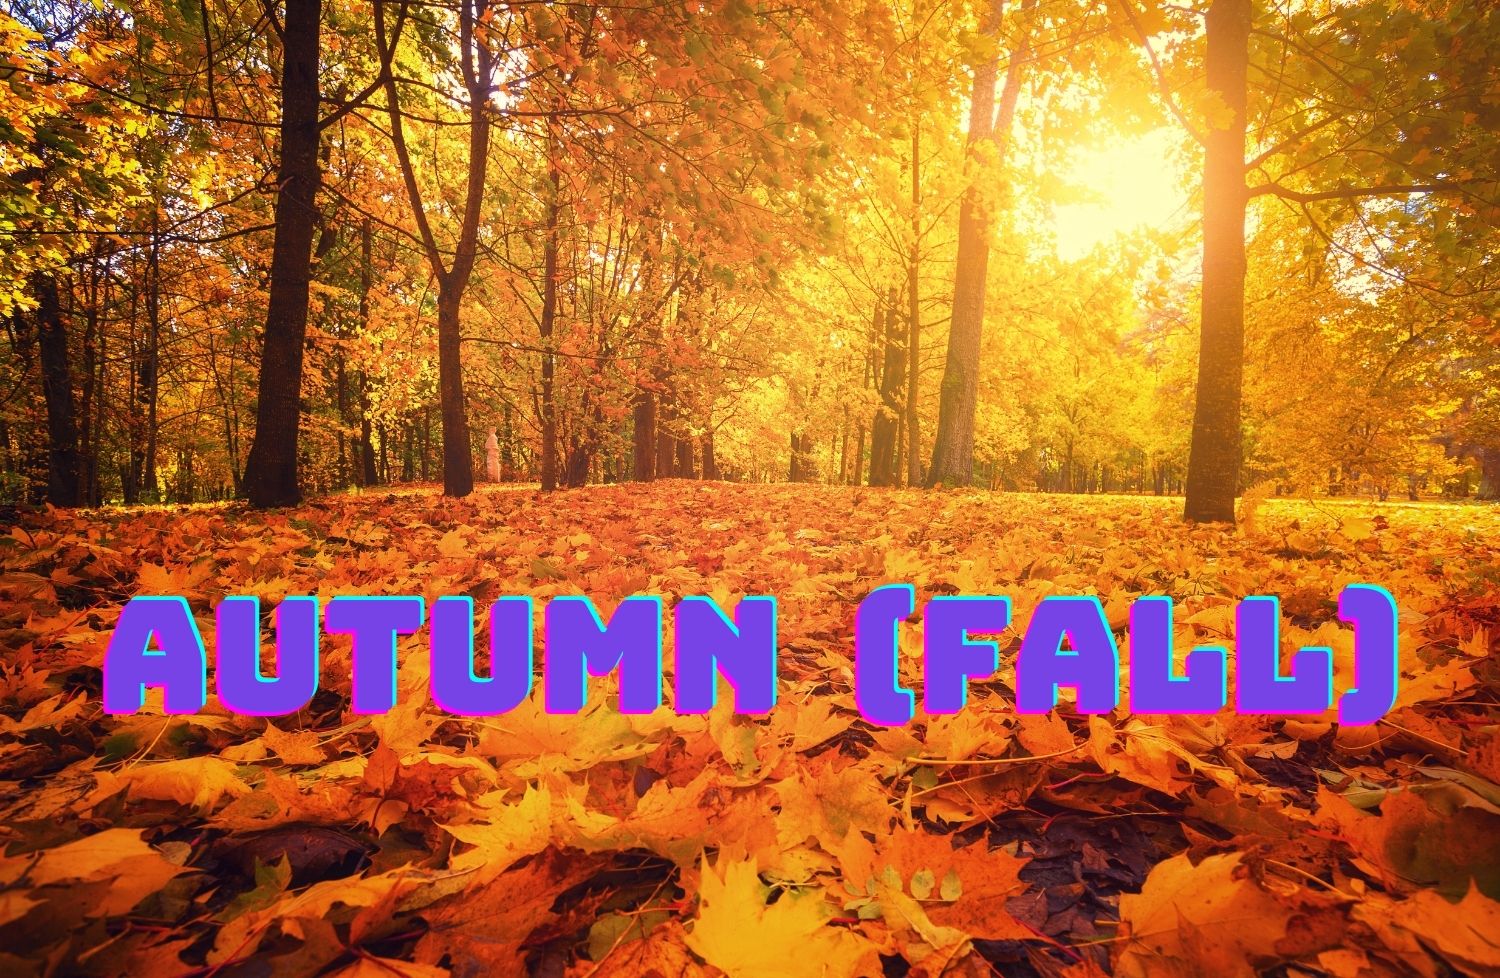 2023 ⇒ How Many Days Until Autumn/Fall?